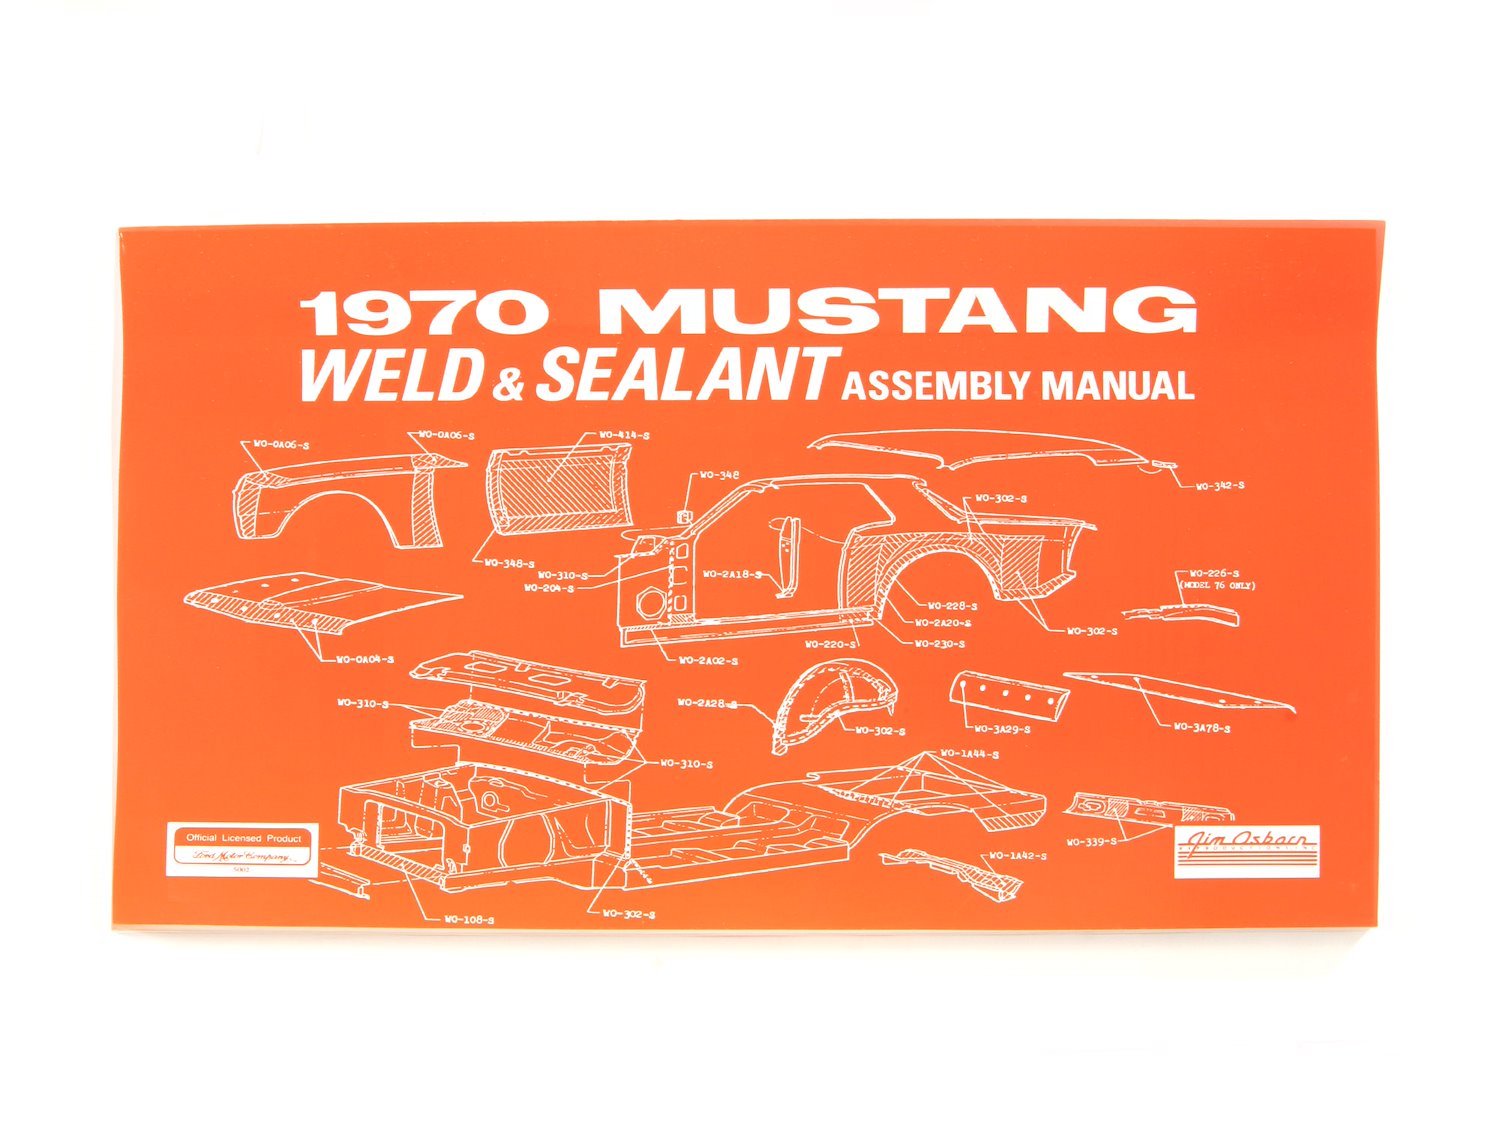 Weld & Sealant Assembly Manual for 1970 Ford Mustang